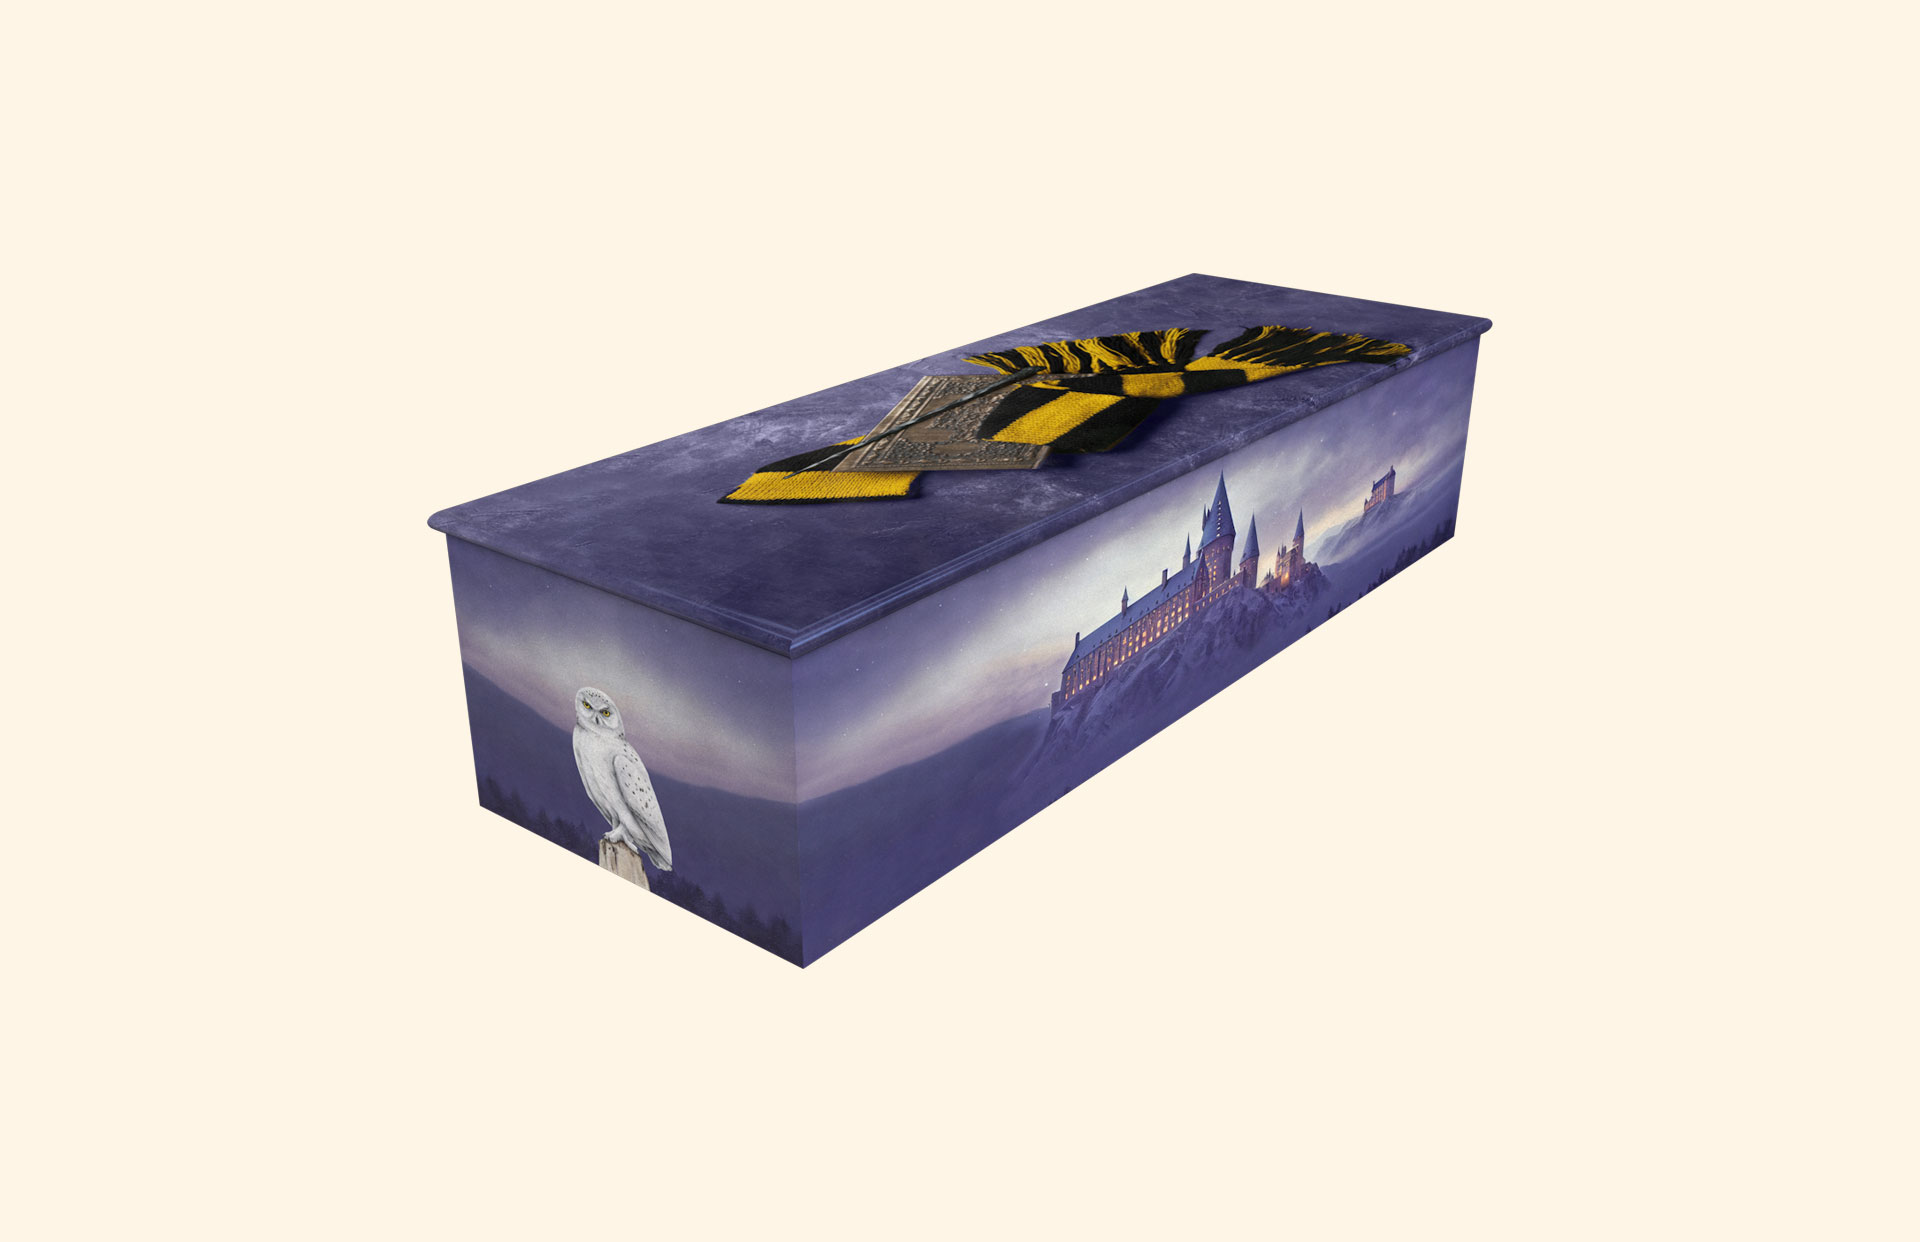 Wizard yellow and black design on a child wooden casket